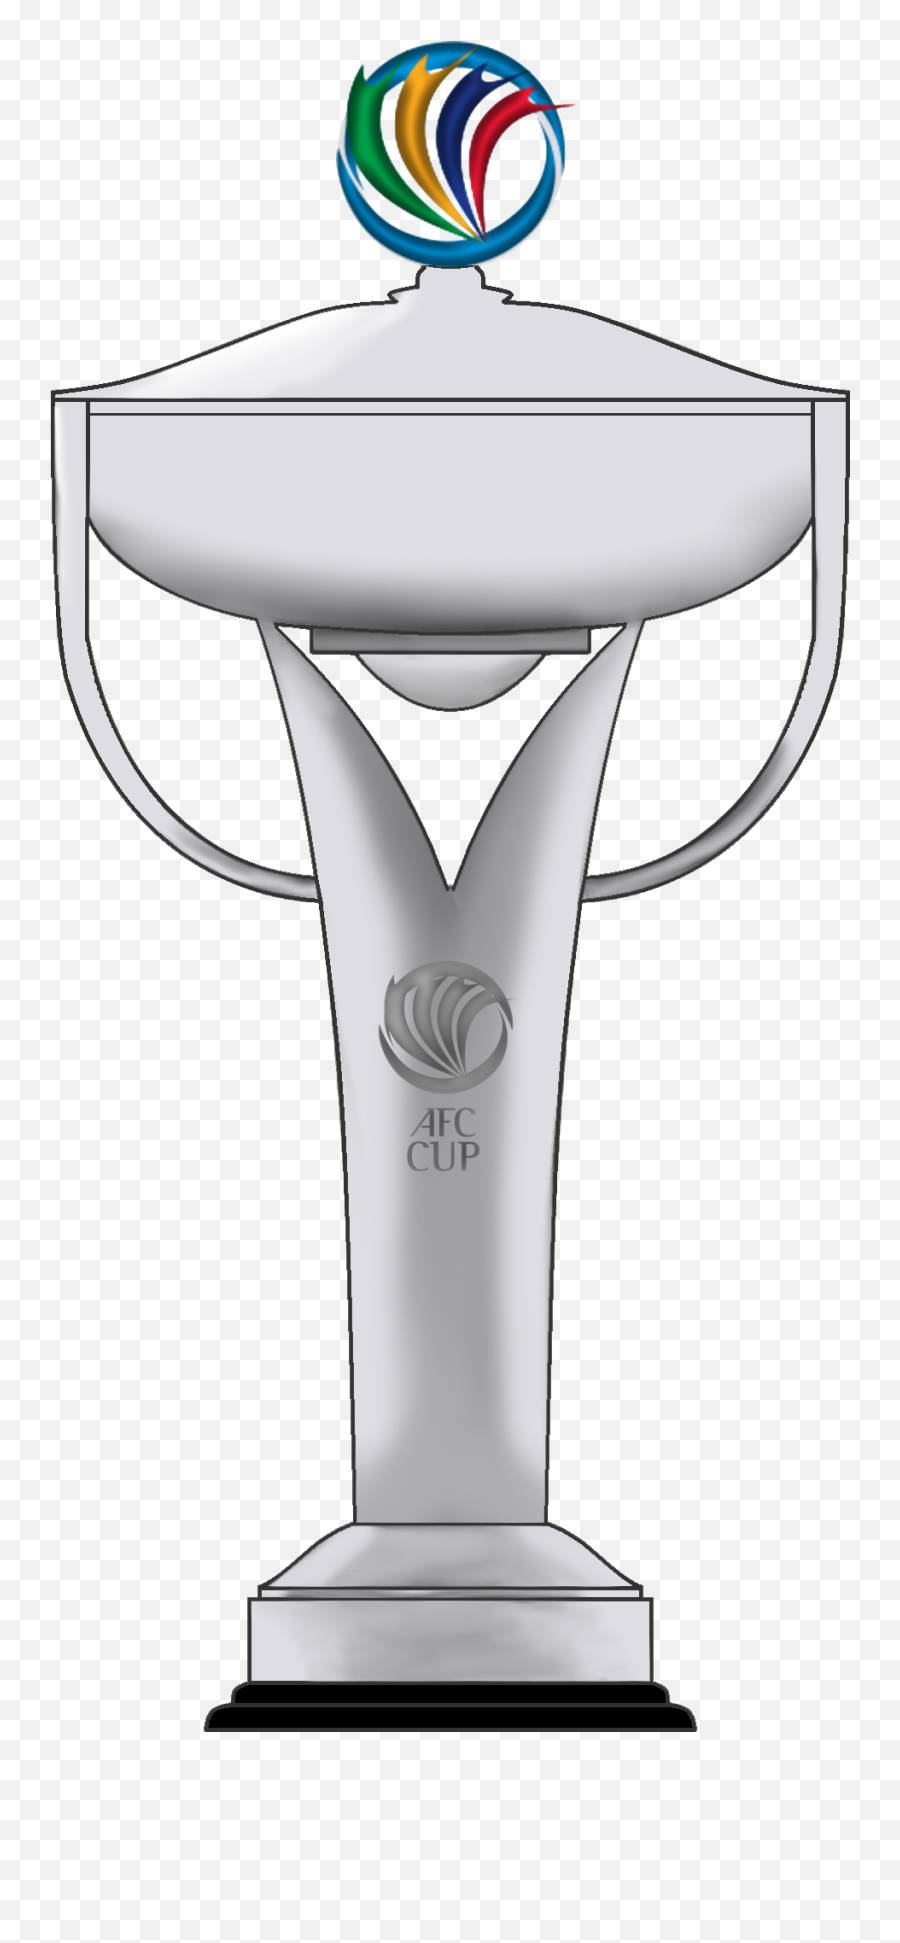 Fileafc Cup 2004 - Png Wikimedia Commons Afc Cup Trophy Png,Sink Png